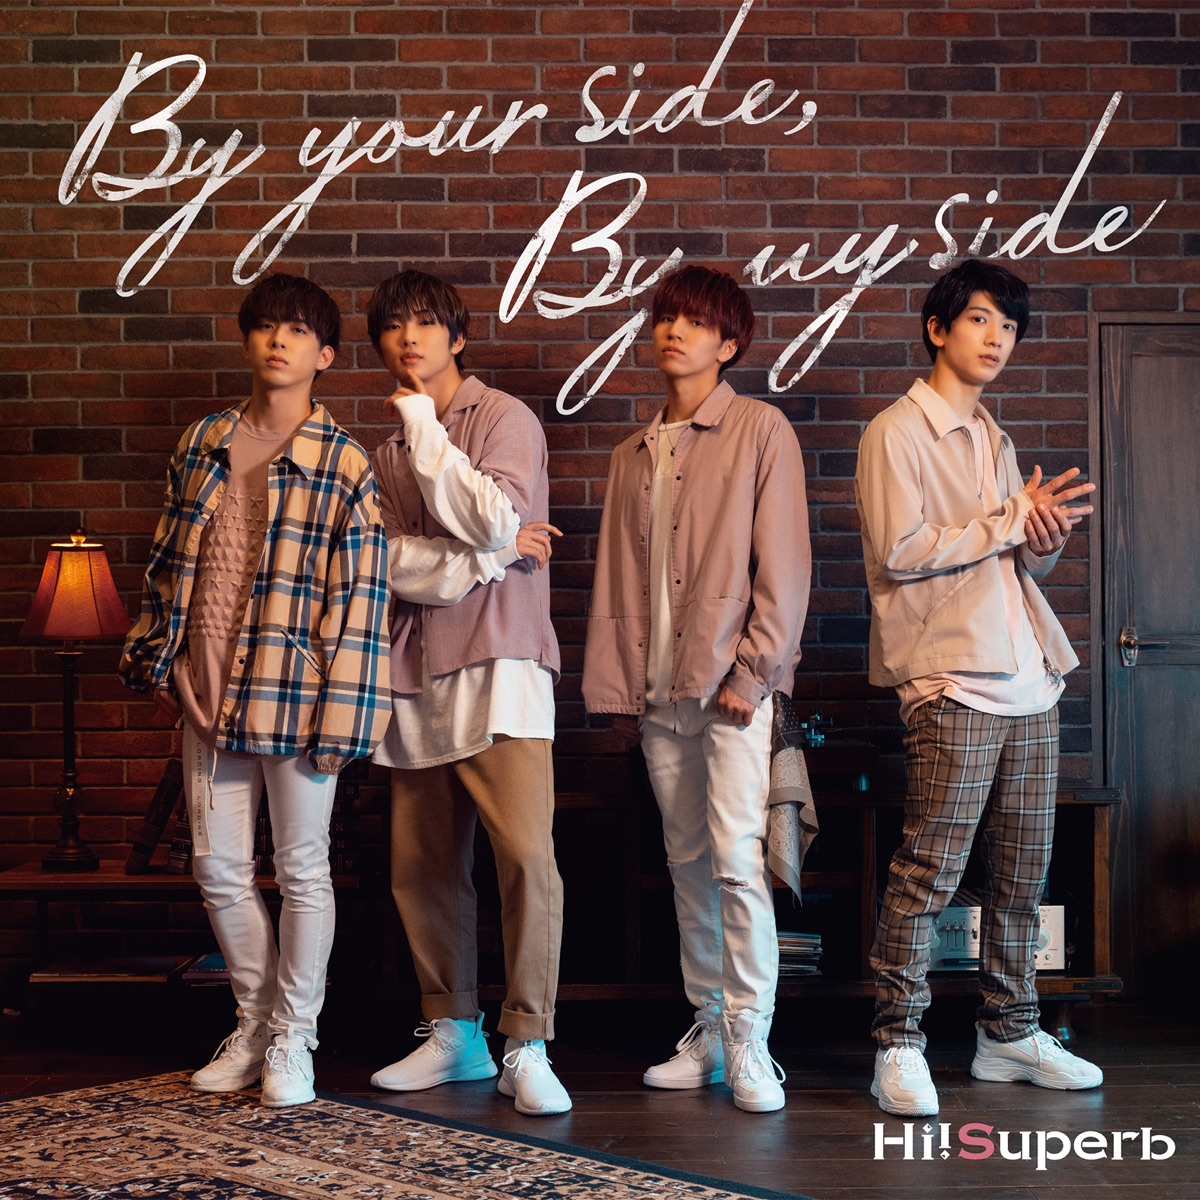 『Hi!Superb - By your side, By my side 歌詞』収録の『By your side, By my side』ジャケット